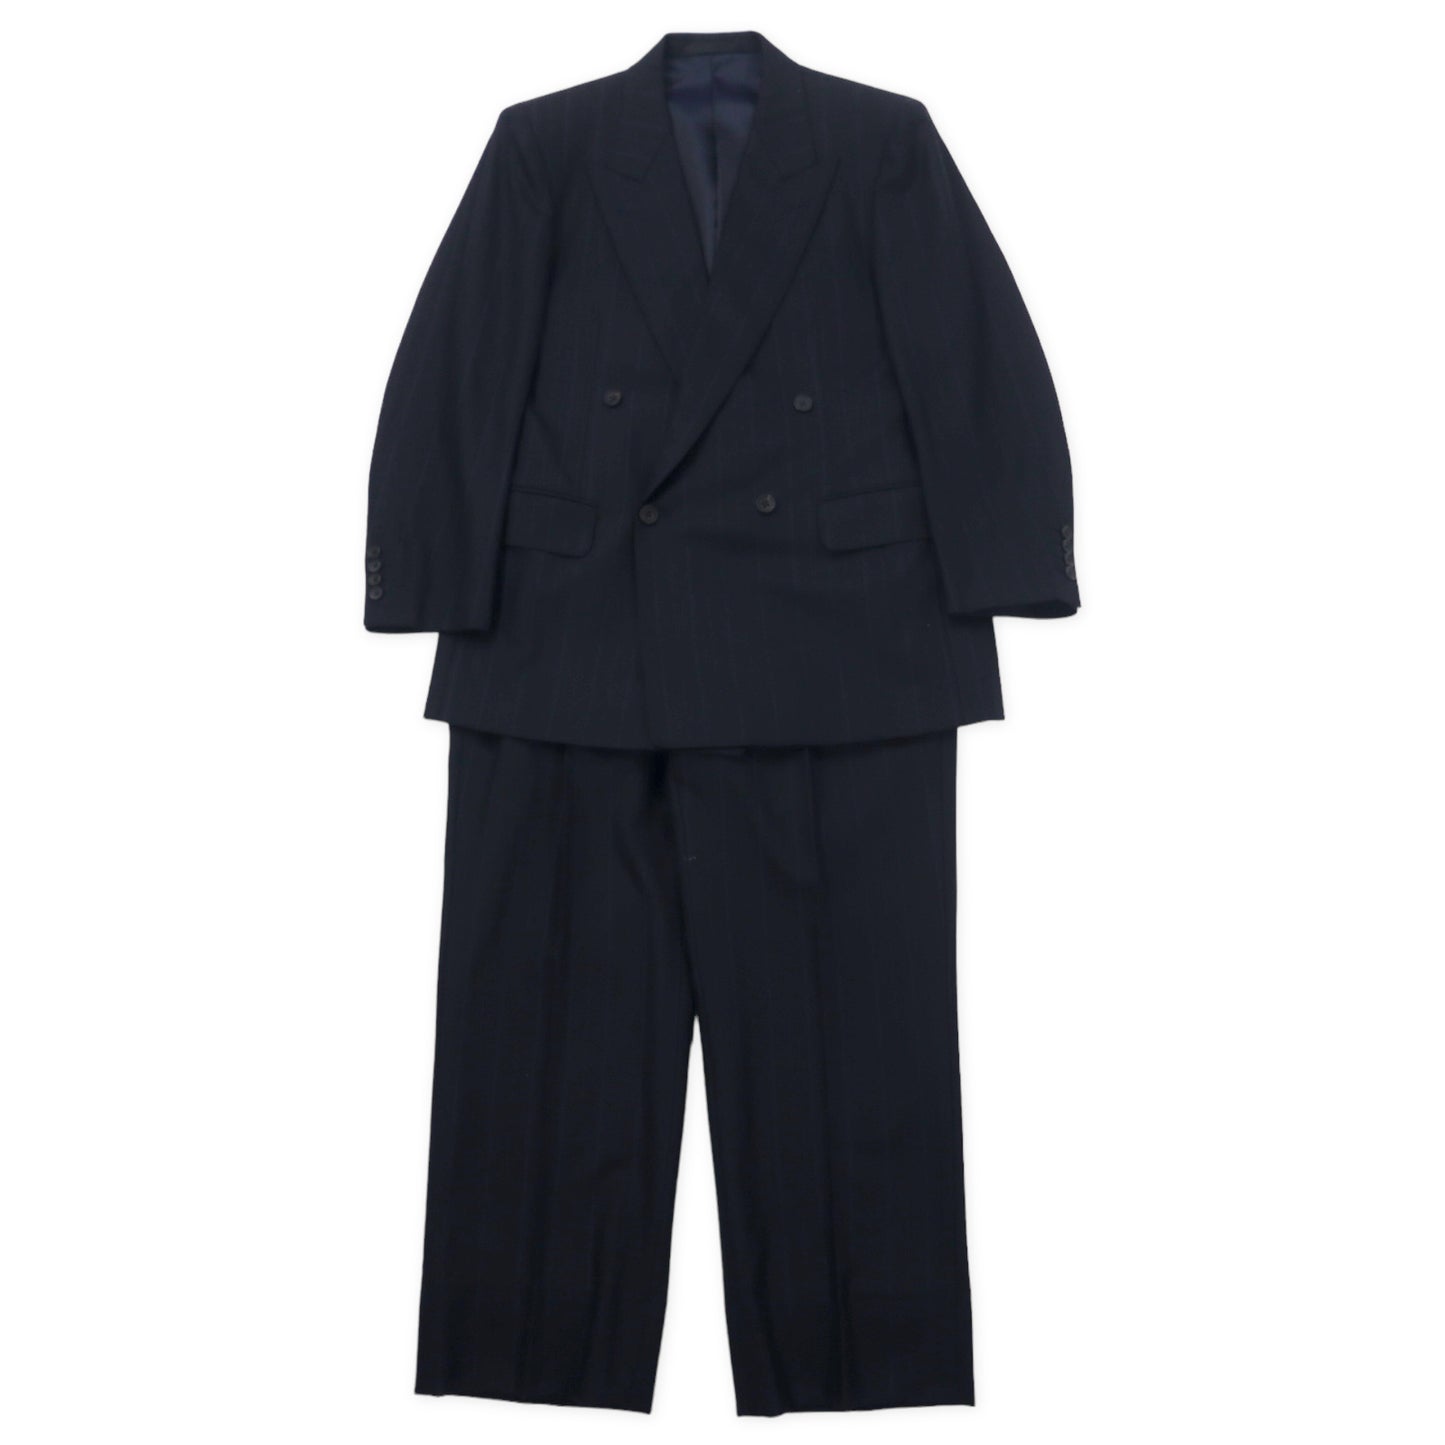 BURBERRYS Double Suit Setup 96-86-170 AB5 Navy Striped Wool Wool 